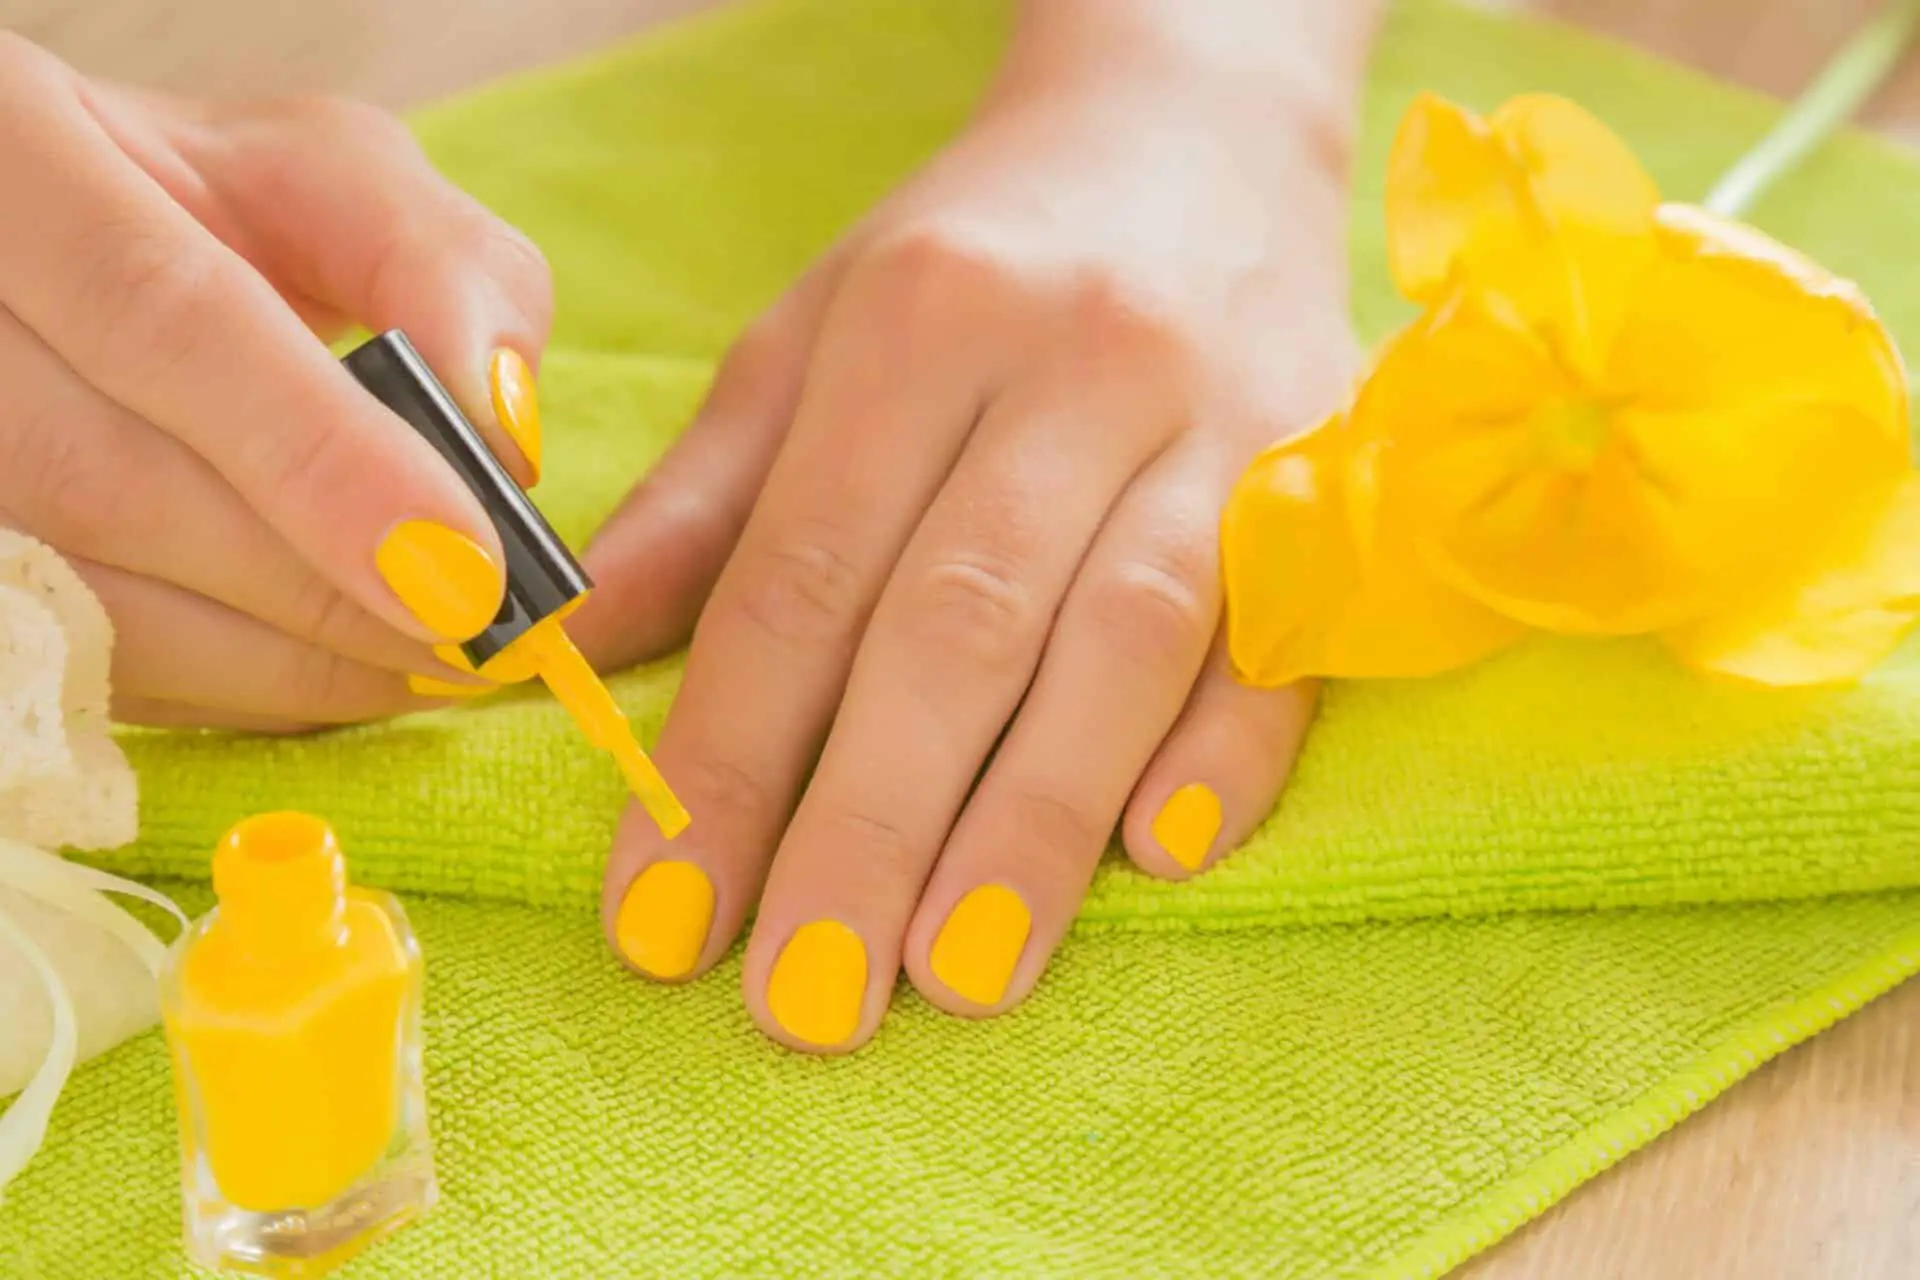 Shop the Best Yellow Nail Polishes in India | I Love My Polish